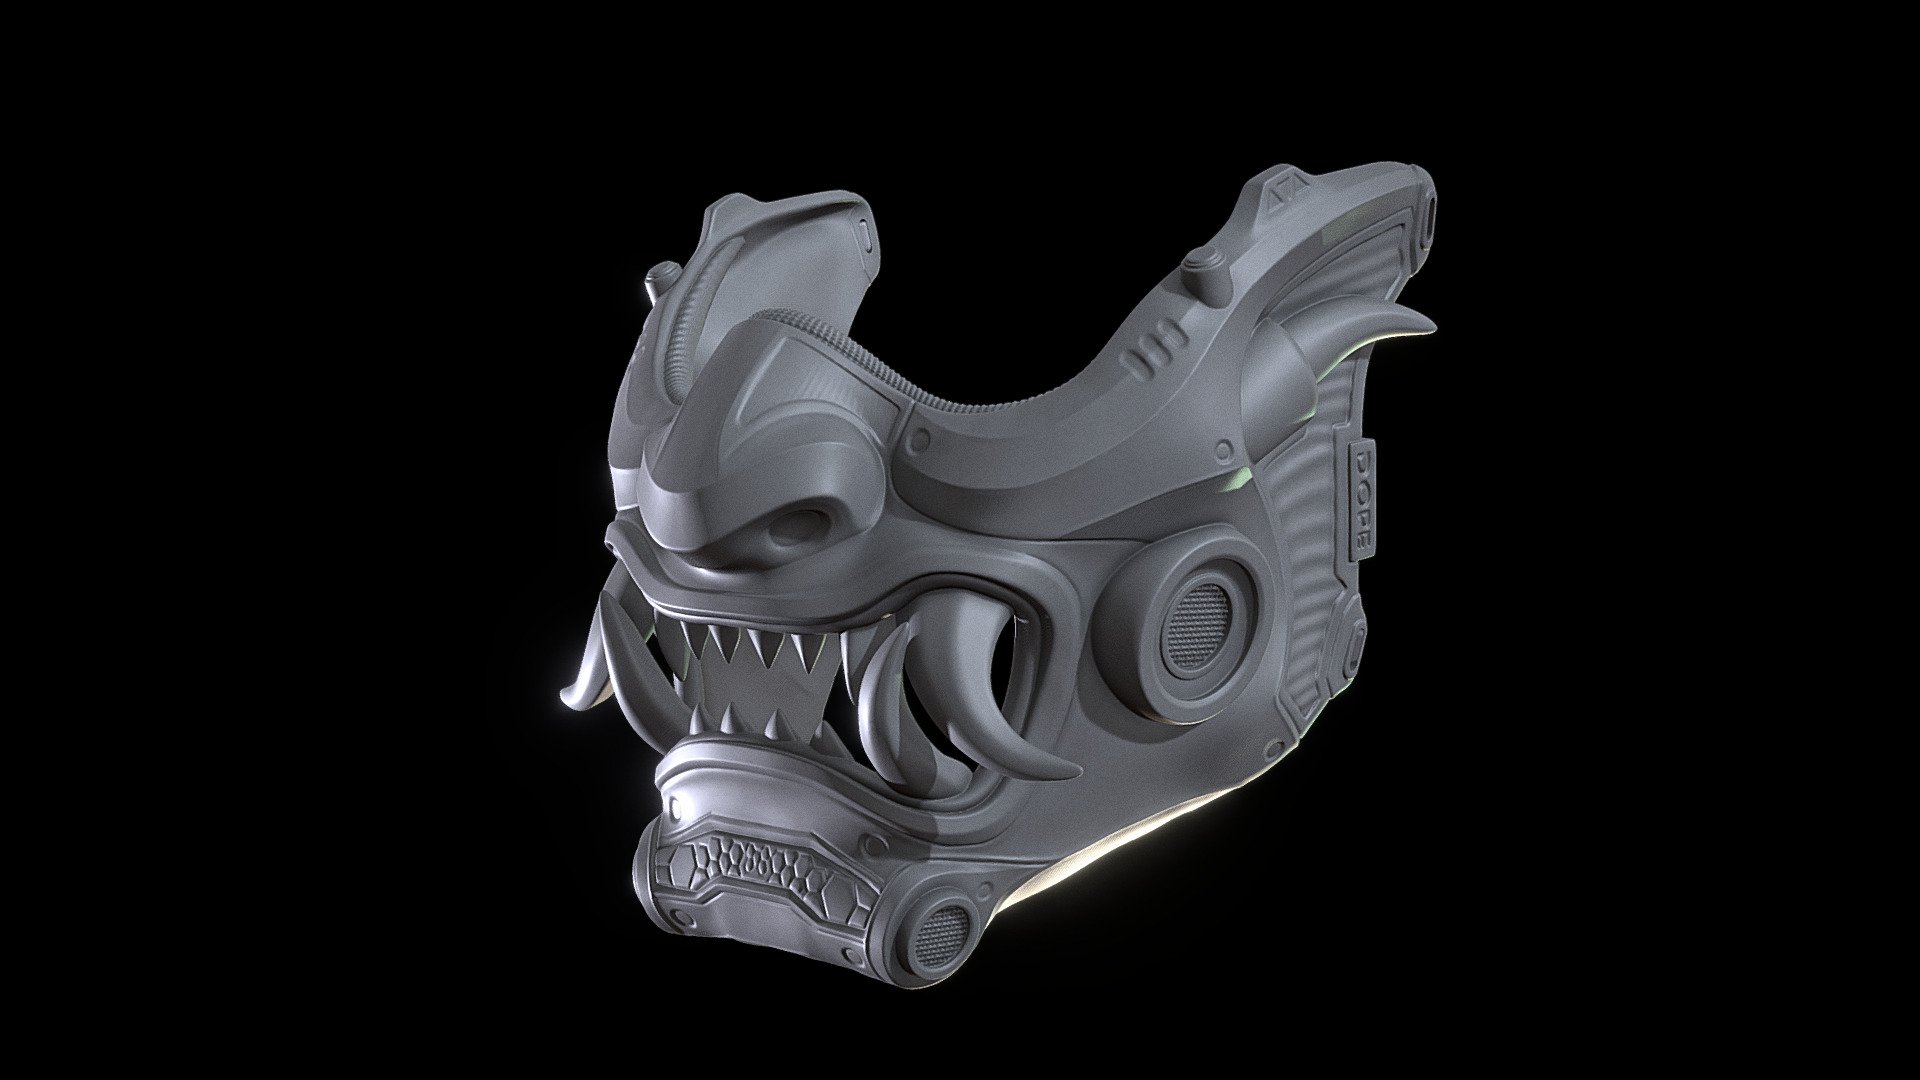 Watertight
Highpoly decimated 250k
S: 26x24x21cm - You can scale it by your own.

Commercial 3d printed masks is allowed.

Reselling the digital files is not allowed.

Let me know if you have any requests.

Enjoy! - Samurai Mask IV - 3D printing V1 - Buy Royalty Free 3D model by Omassyx 3d model